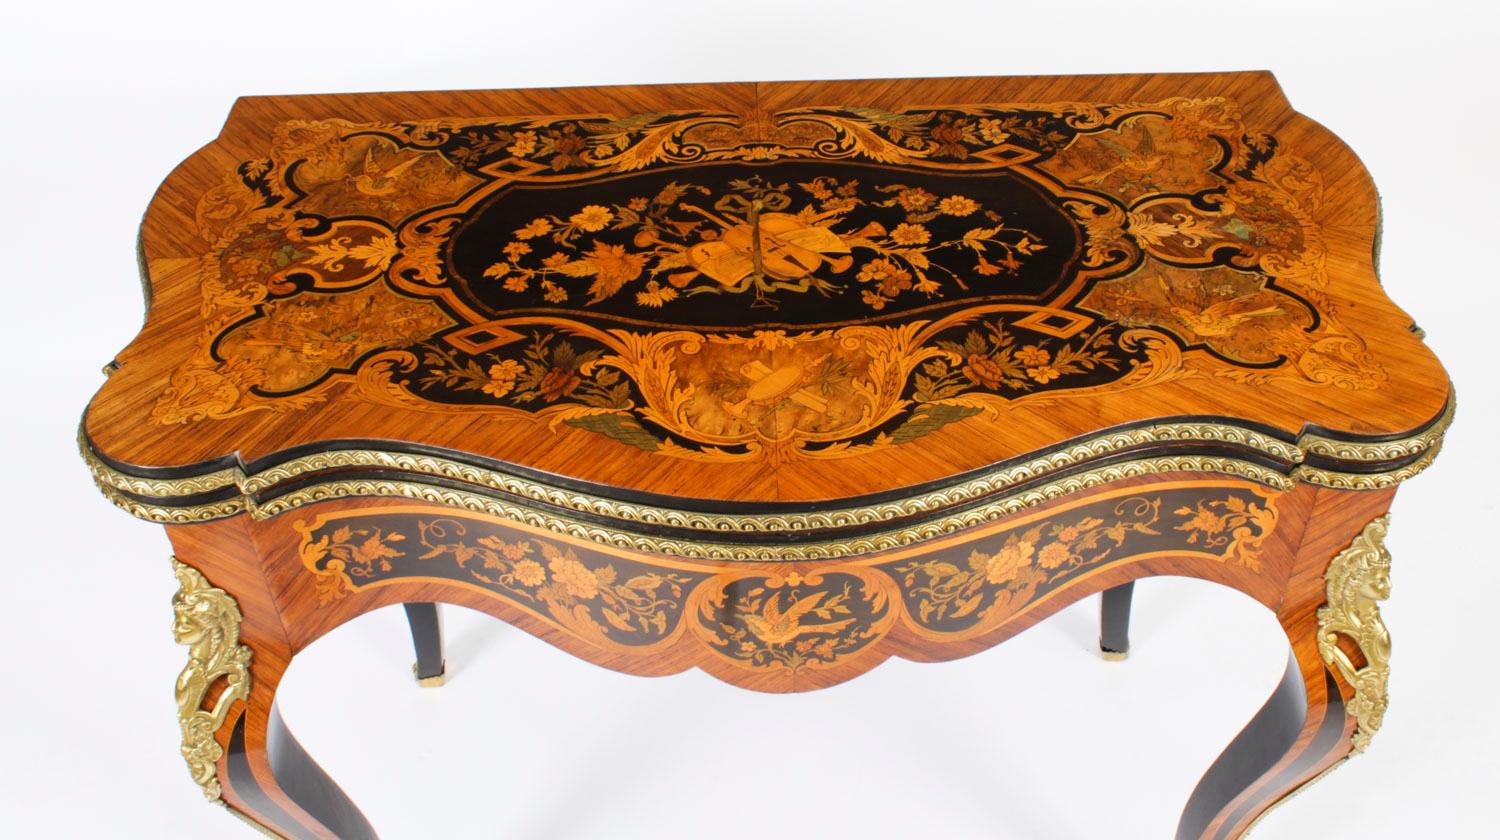 This is a stunning 19th century antique French Louis XV Revival ormolu mountd floral marquetry shaped rectangular card table, circa 1870 in date.
 
The shaped top has banded marquetry inlay encompassing an exquisite floral marquetry bouquet of